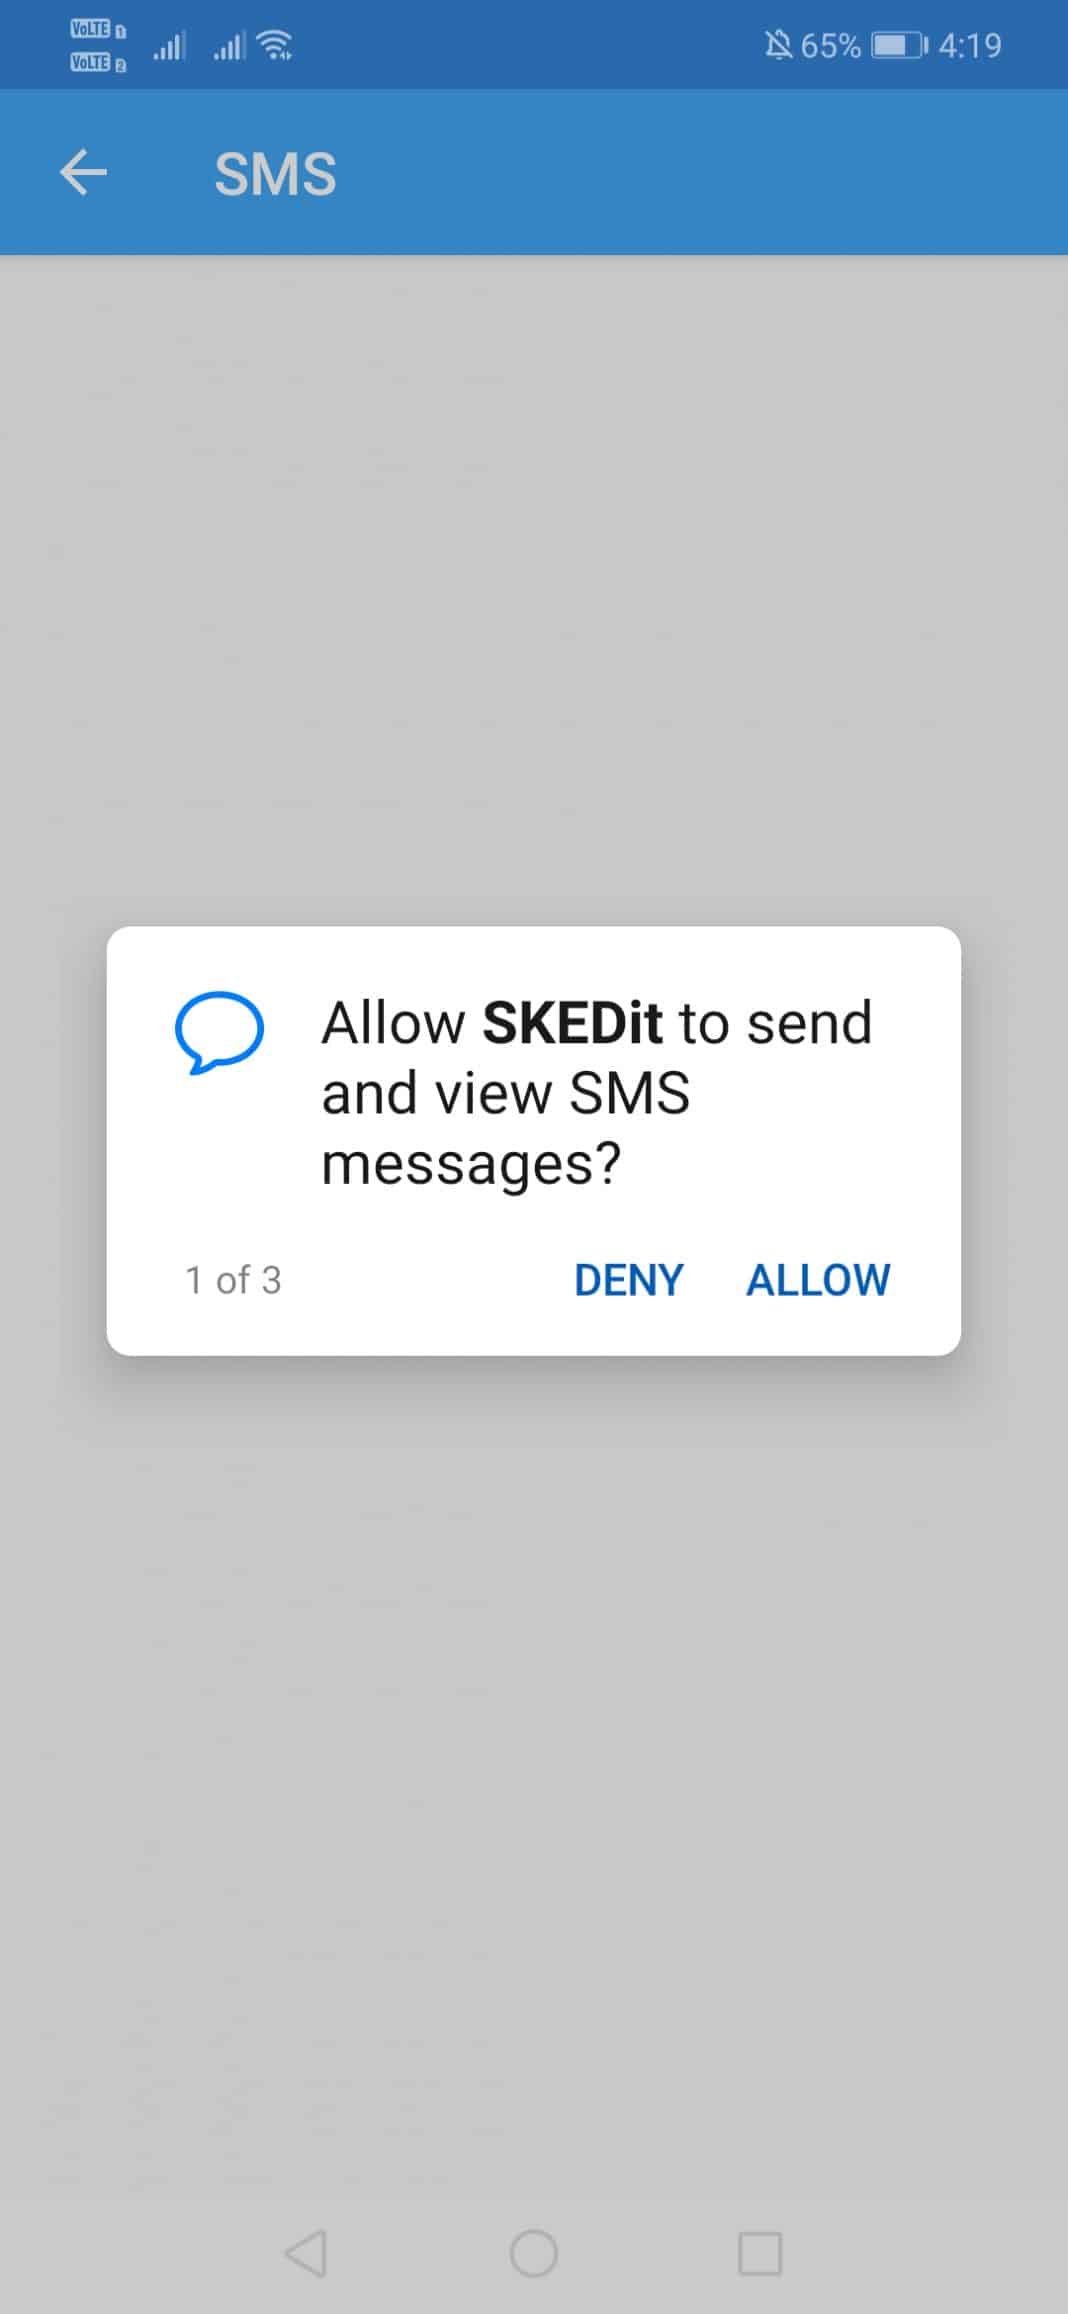 grant the SMS permissions